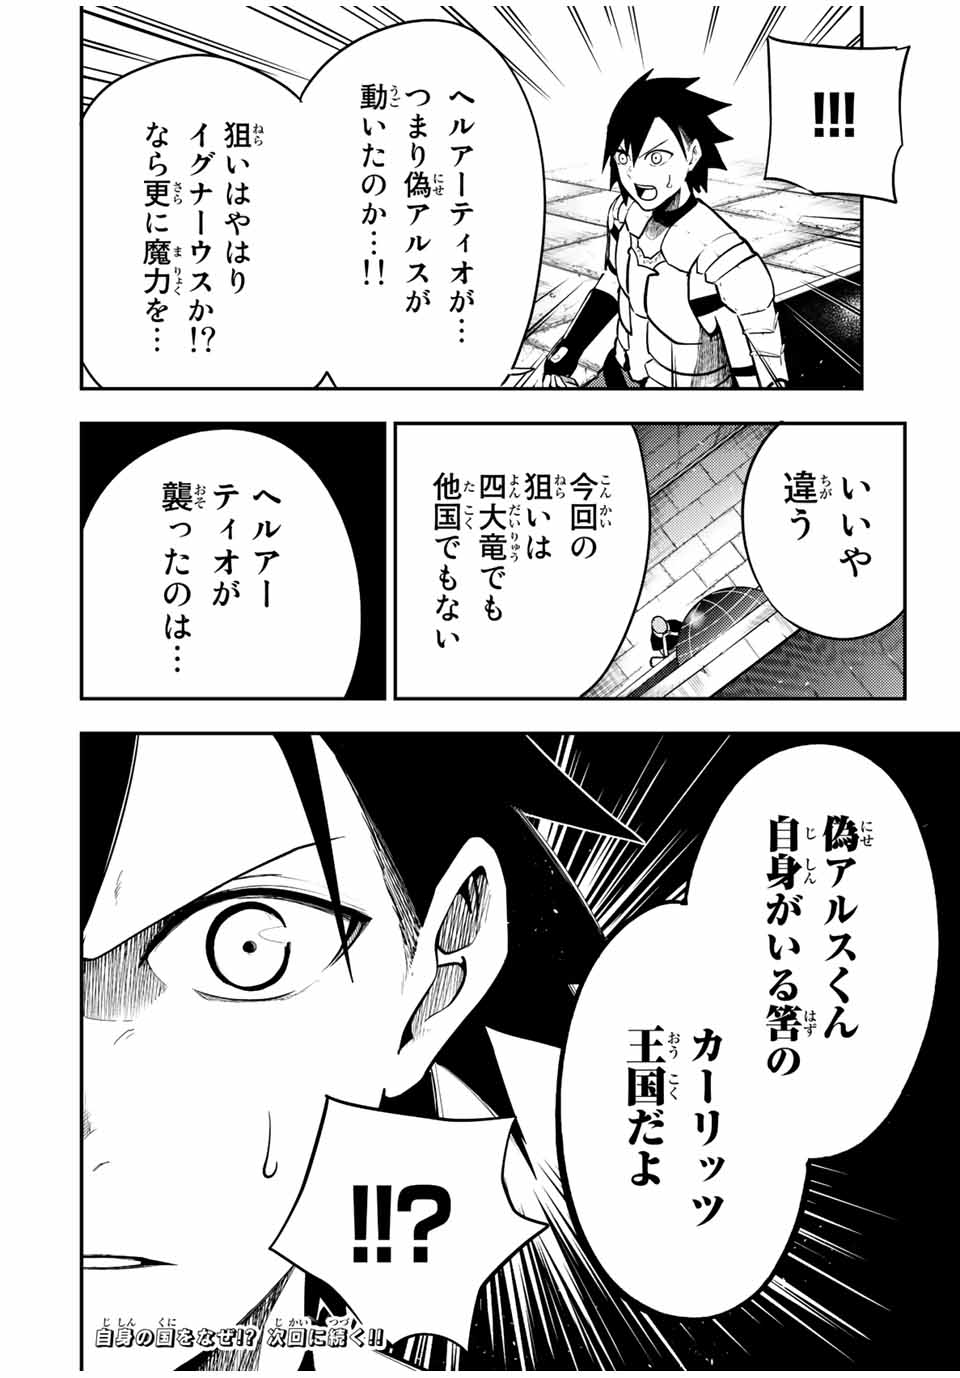 the strongest former prince-; 奴隷転生 ～その奴隷、最強の元王子につき～ 第78話 - Page 20